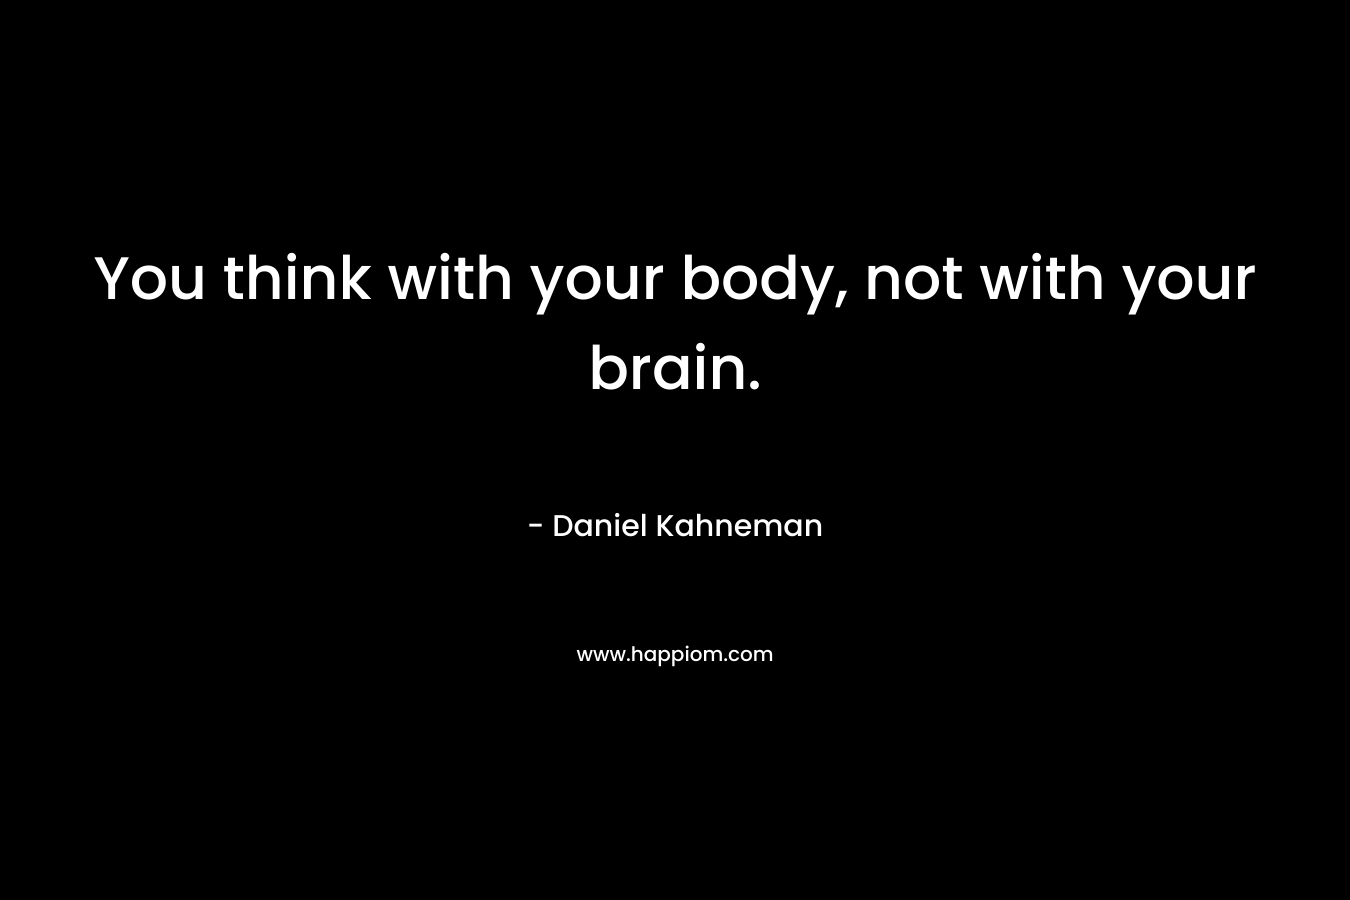 You think with your body, not with your brain. – Daniel Kahneman